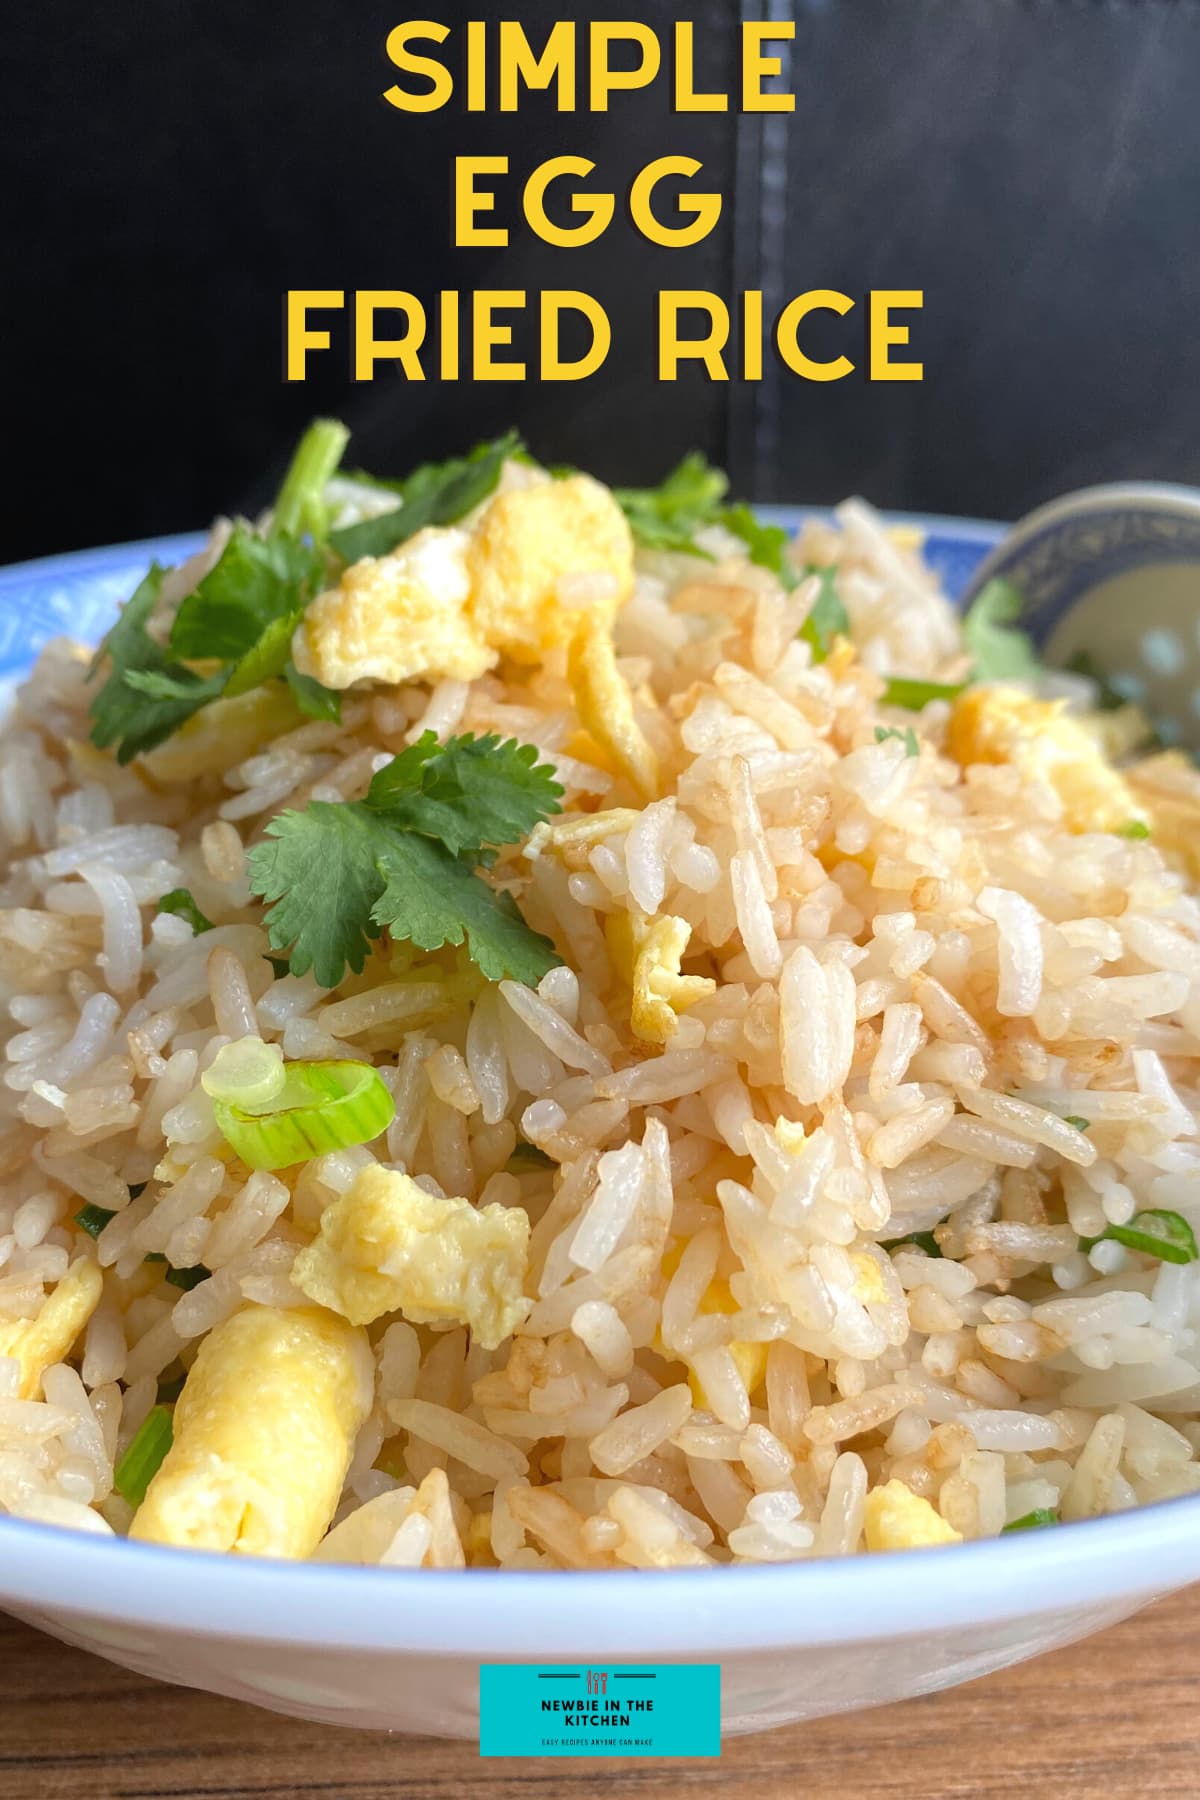 Simple Egg Fried Rice. A simple, easy recipe for how to make Chinese restaurant-style egg fried rice. Takes only minutes to make and turns out perfect every time!